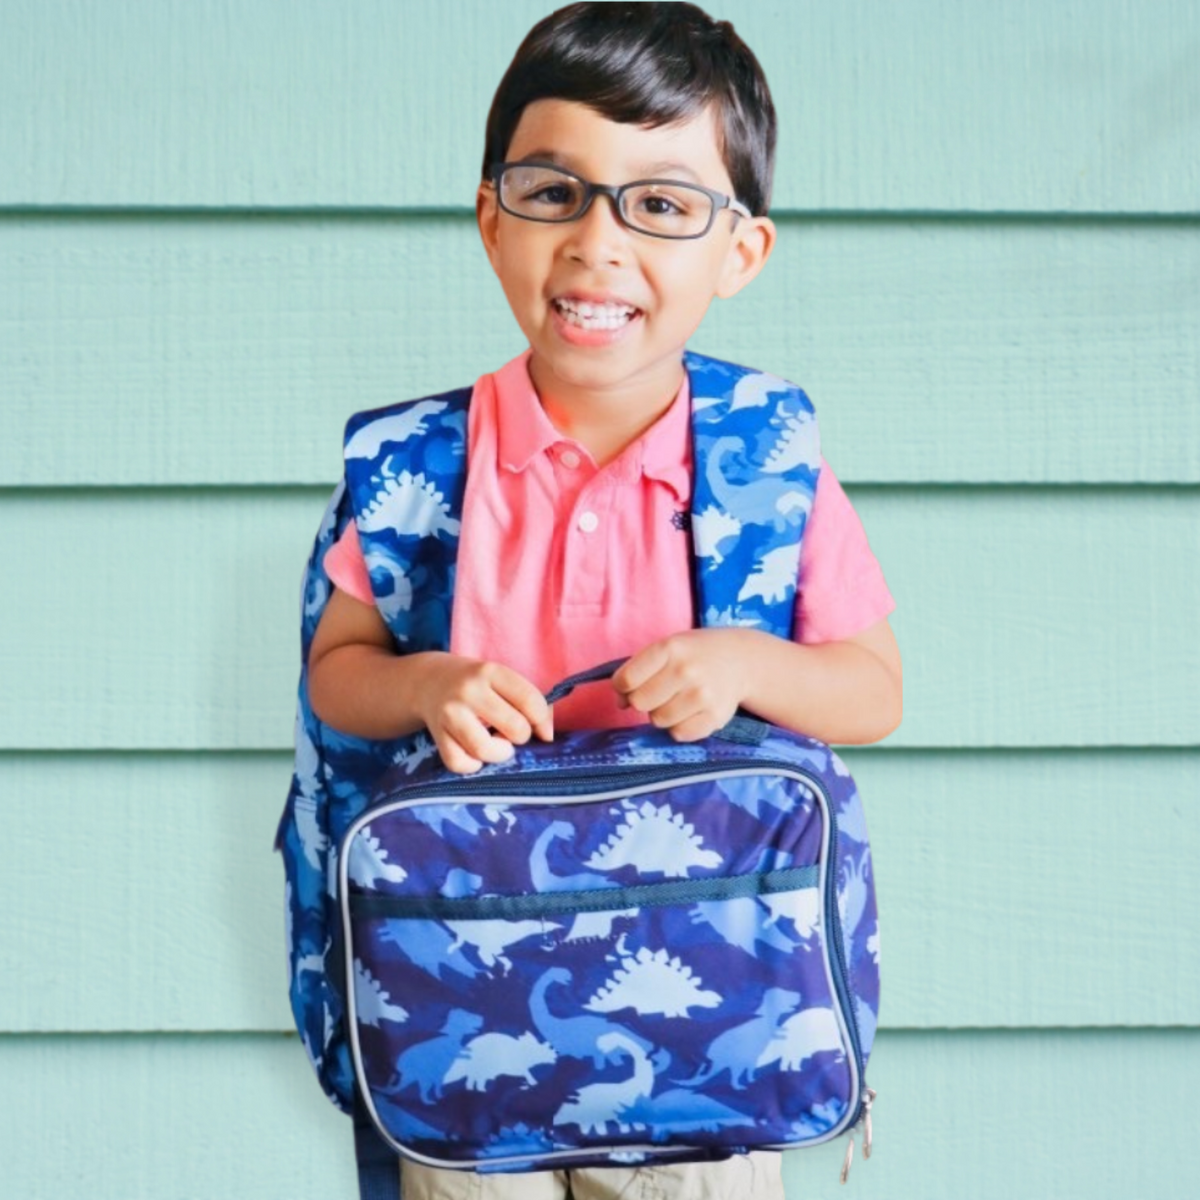 Dinosaur Lunch Box - Soft-Sided, Insulated, Gives Back to a Great